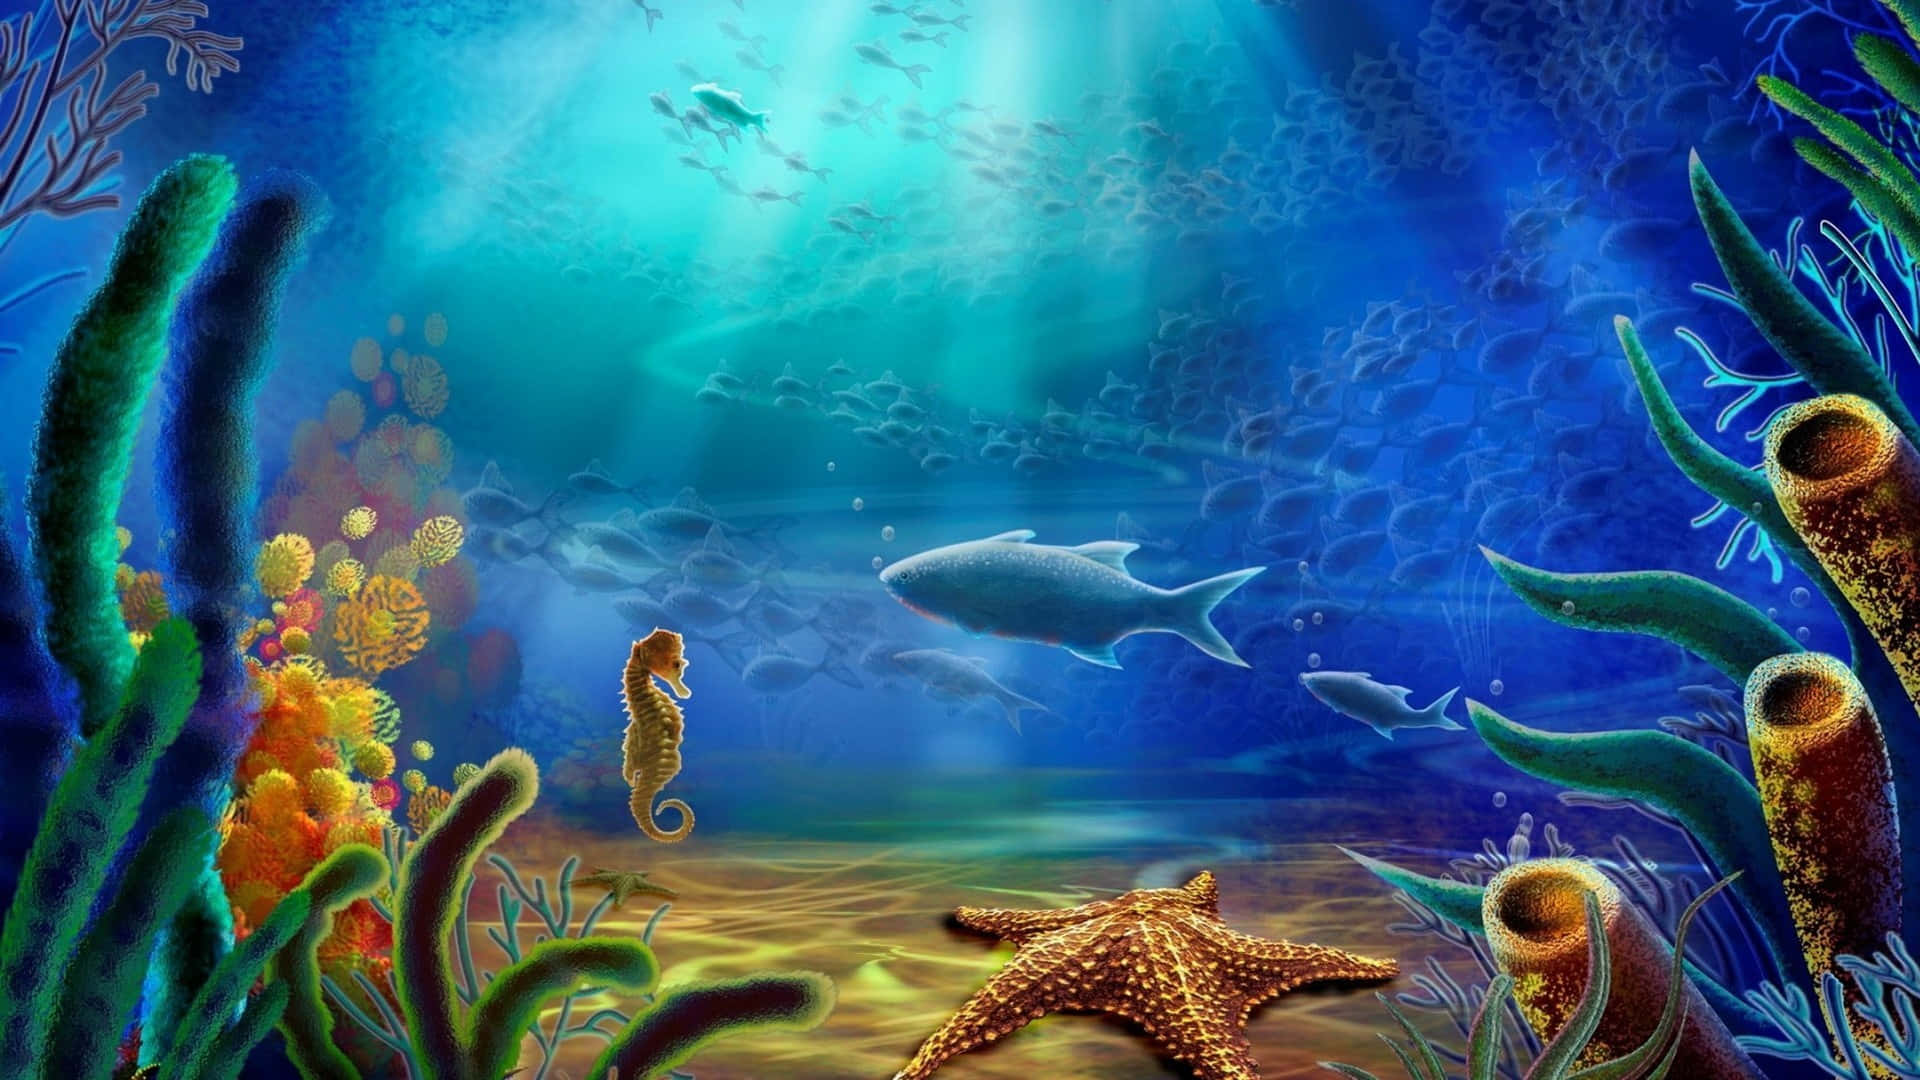 An enchanting view of the underwater world Wallpaper